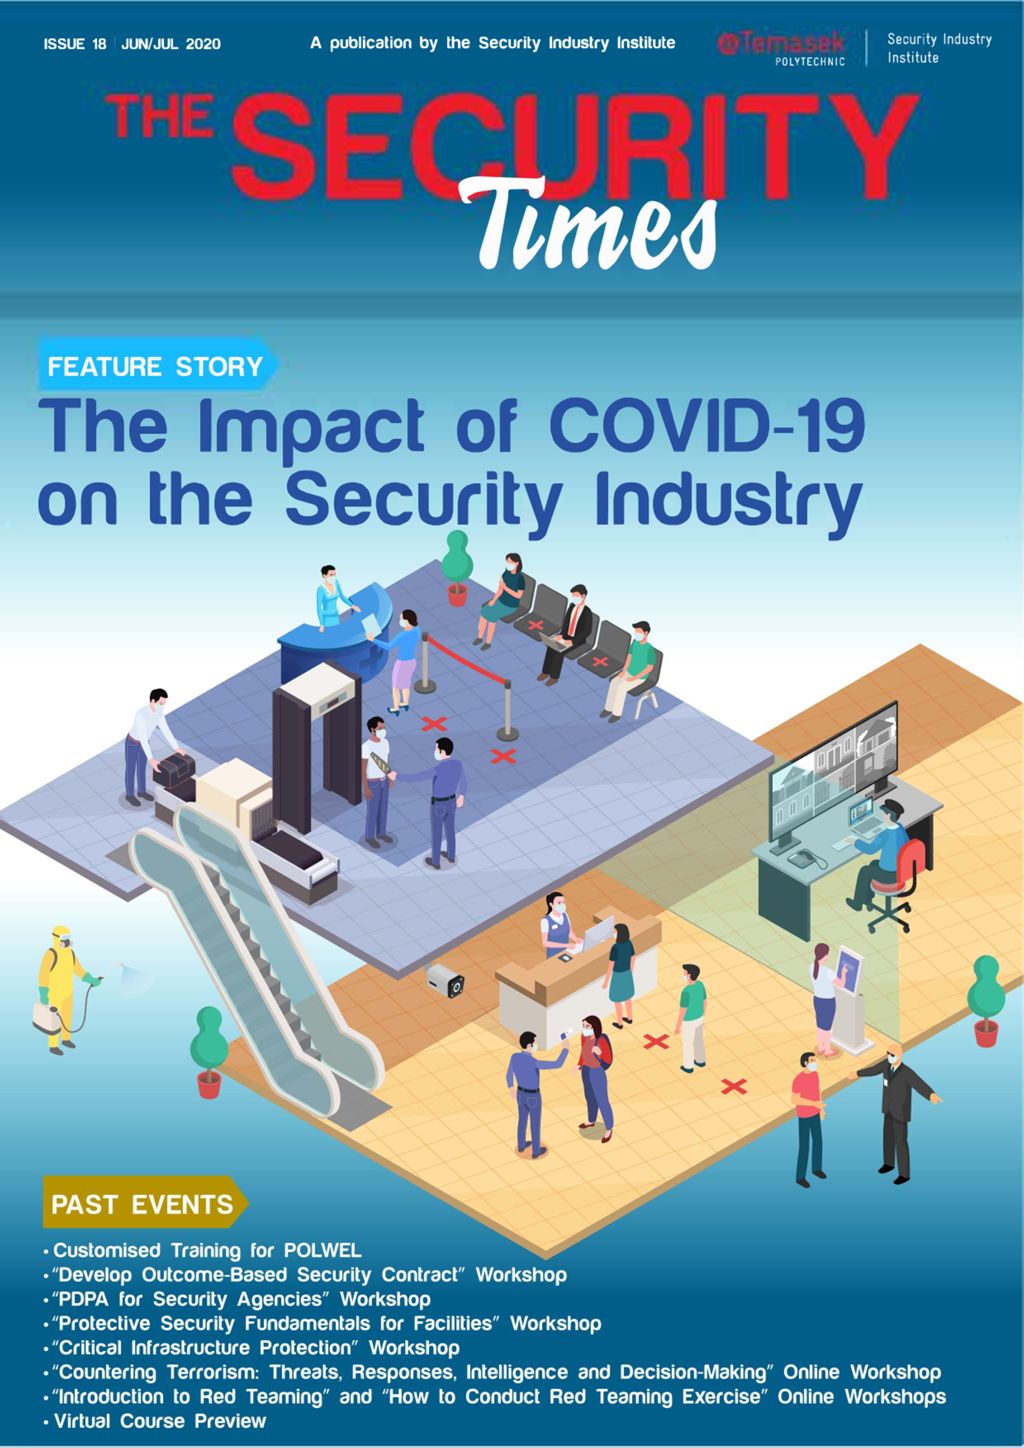 The Security Times : a <em>publication</em> by the Security Industry Institute. Jun. / Jul. 2020. Issue 18